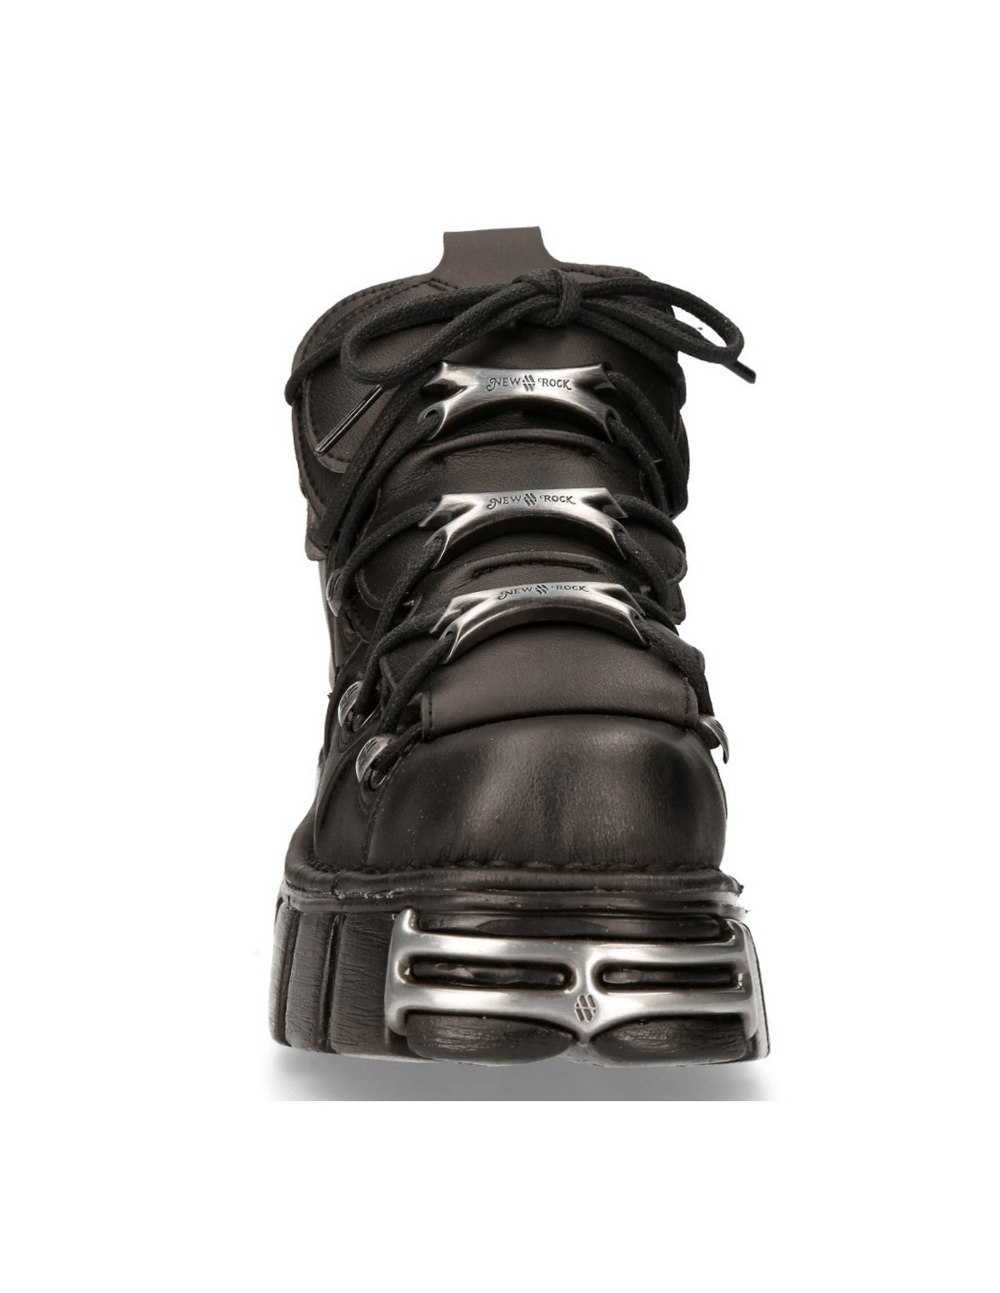 NEW ROCK Black Tower Ankle Boots with Metal Accents